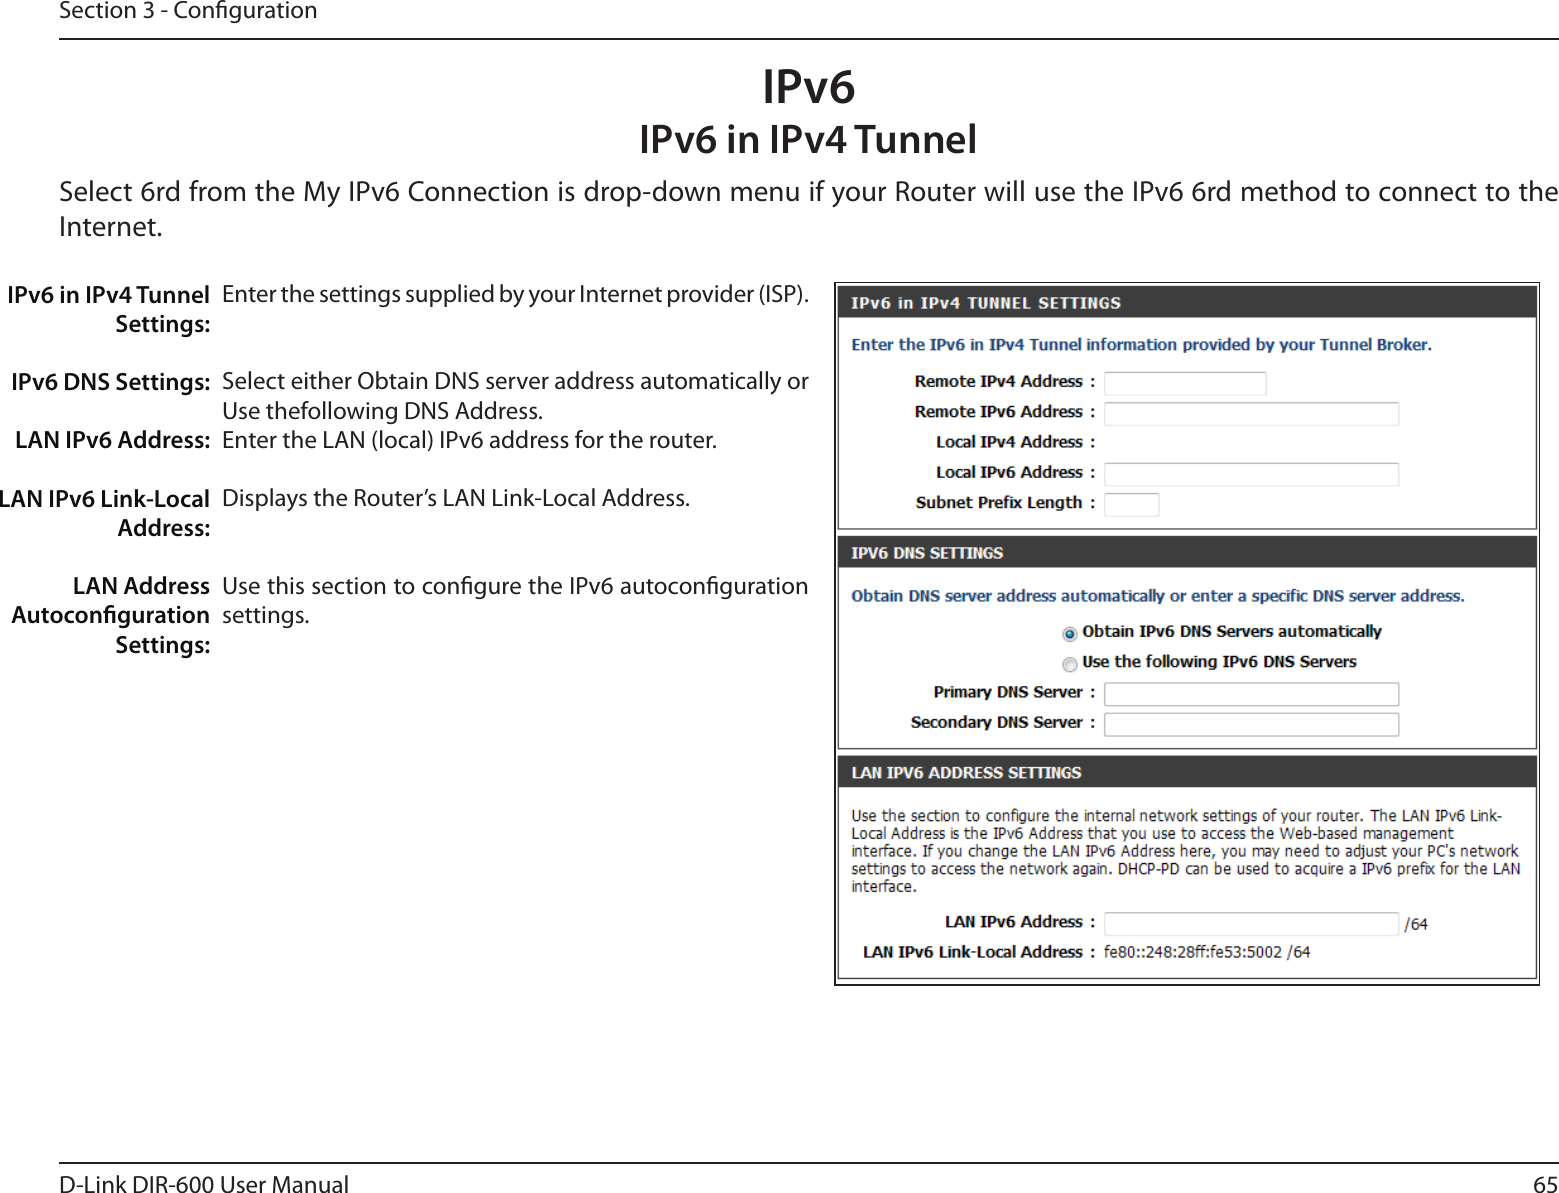 65D-Link DIR-600 User ManualSection 3 - CongurationIPv6IPv6 in IPv4 TunnelSelect 6rd from the My IPv6 Connection is drop-down menu if your Router will use the IPv6 6rd method to connect to the Internet.Enter the settings supplied by your Internet provider (ISP).Select either Obtain DNS server address automatically or Use thefollowing DNS Address.Enter the LAN (local) IPv6 address for the router.Displays the Router’s LAN Link-Local Address.Use this section to congure the IPv6 autoconguration settings.IPv6 in IPv4 Tunnel Settings:IPv6 DNS Settings: LAN IPv6 Address: LAN IPv6 Link-Local Address:LAN Address Autoconguration Settings: